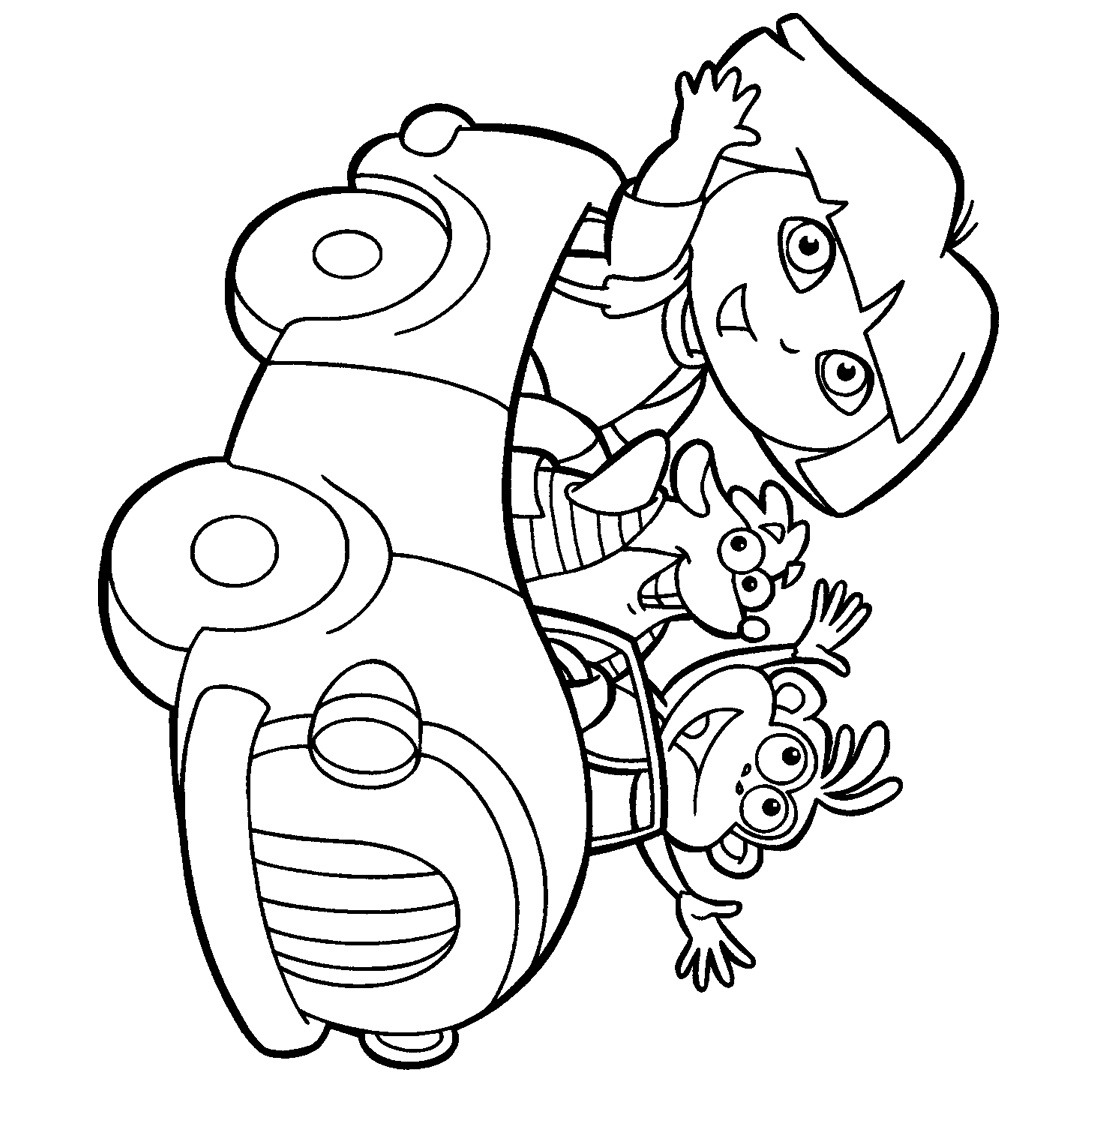 coloring-pages-for-kids-kids-world